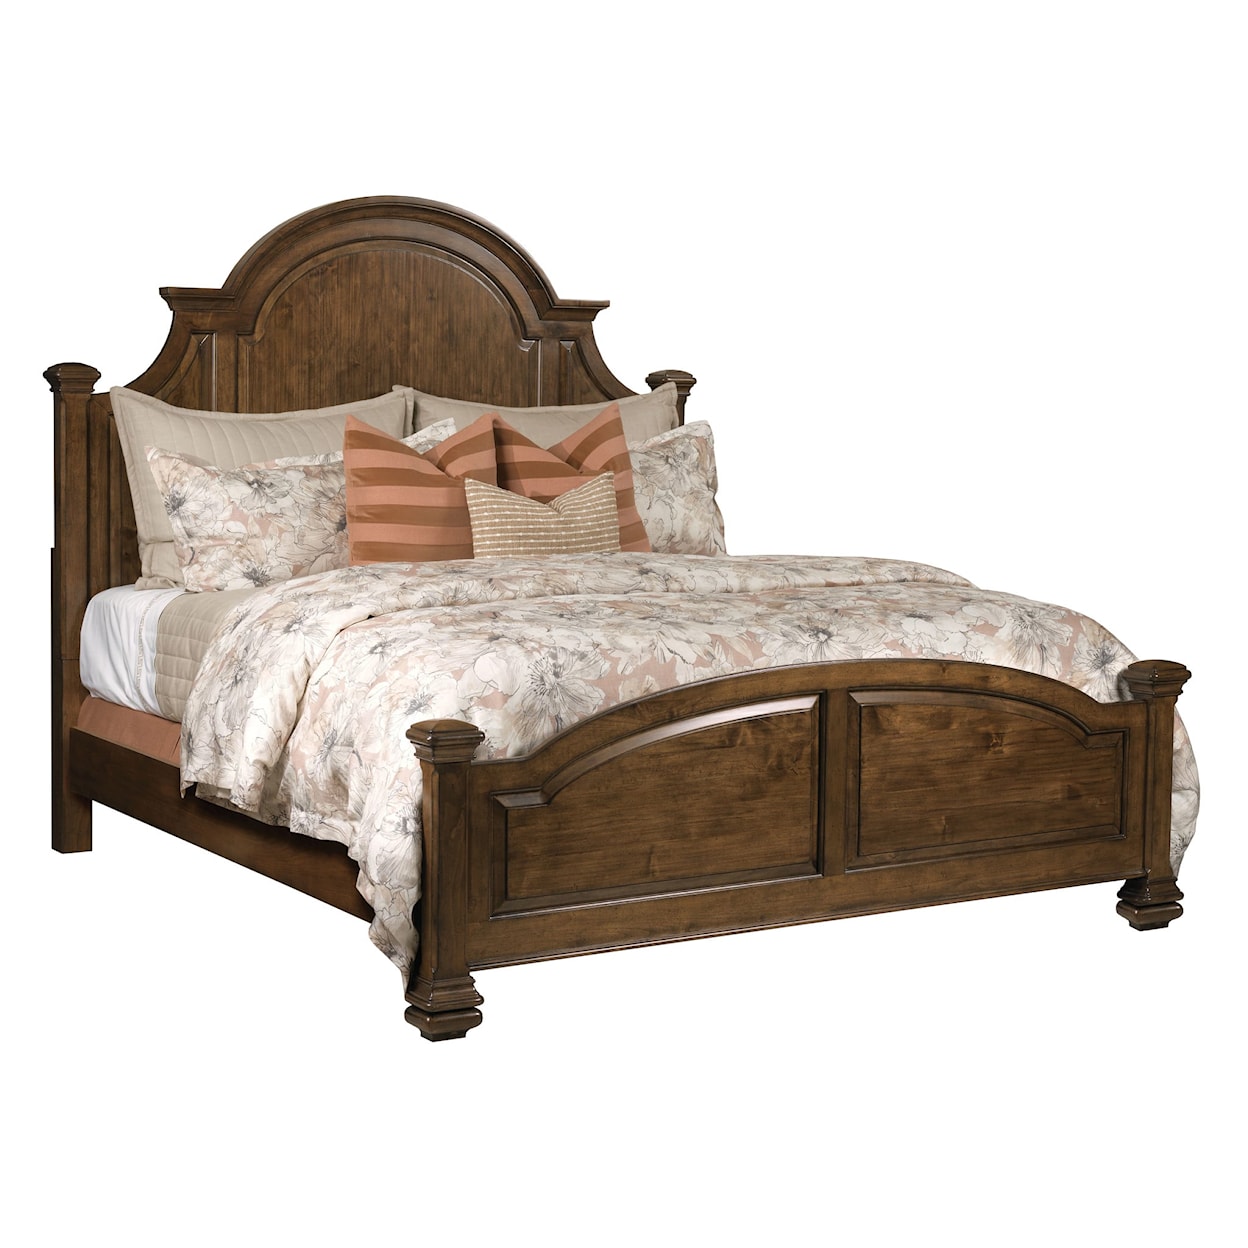 Kincaid Furniture Commonwealth Allenby Queen Panel Bed - Complete